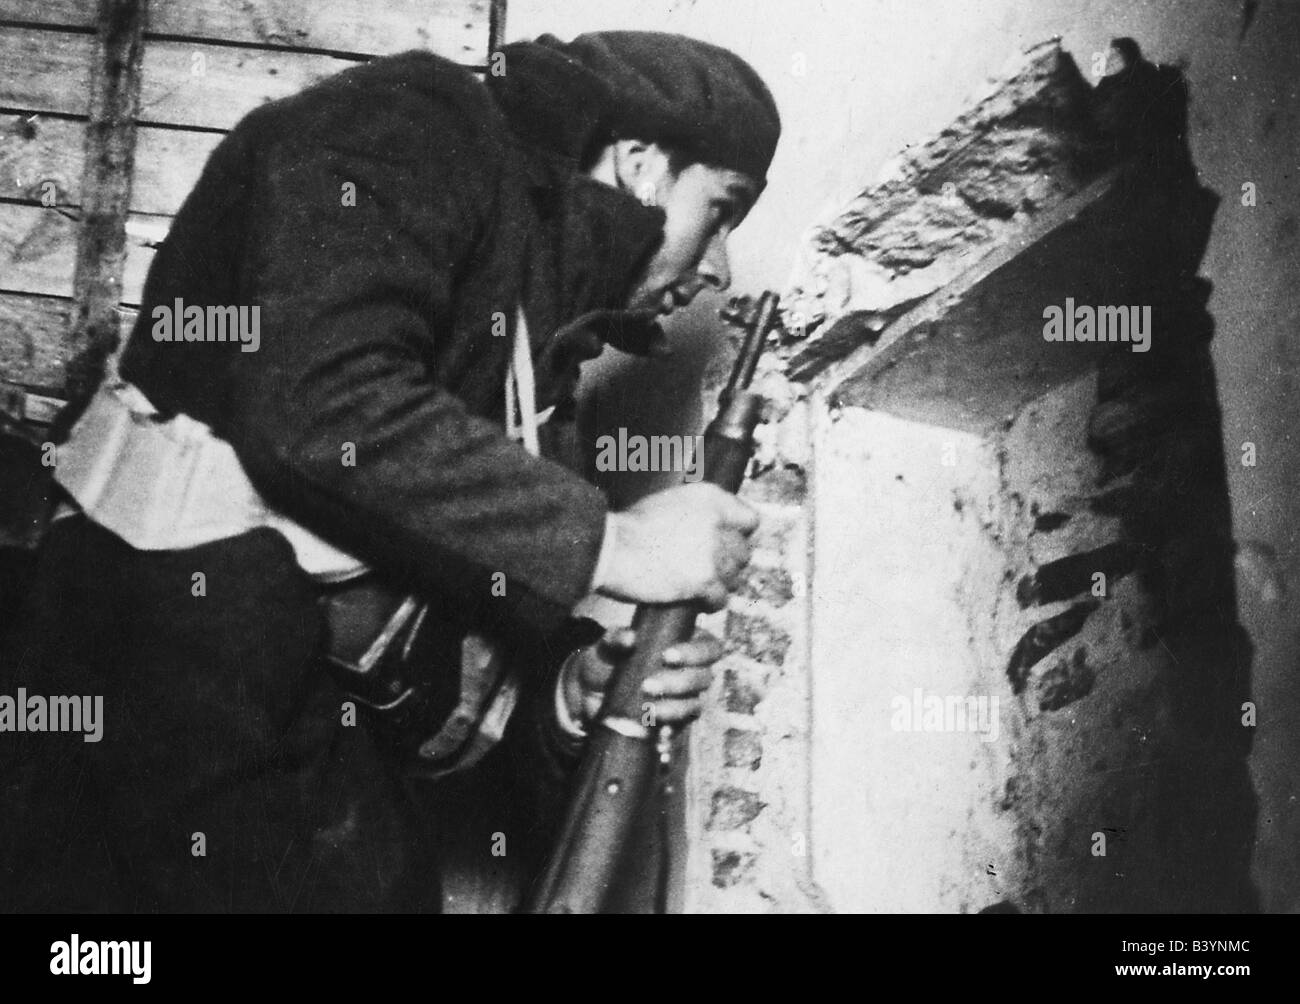 geography / travel, Spain, Spanish Civil War 1936 - 1939, republican sentry at the front, January 1937, soldier, winter, frontline, soldier, beret, cap, arm, weapon, arm, rifle, gun, historic, historical, guard, male, man, people, 1930s, 20th century, men, Stock Photo